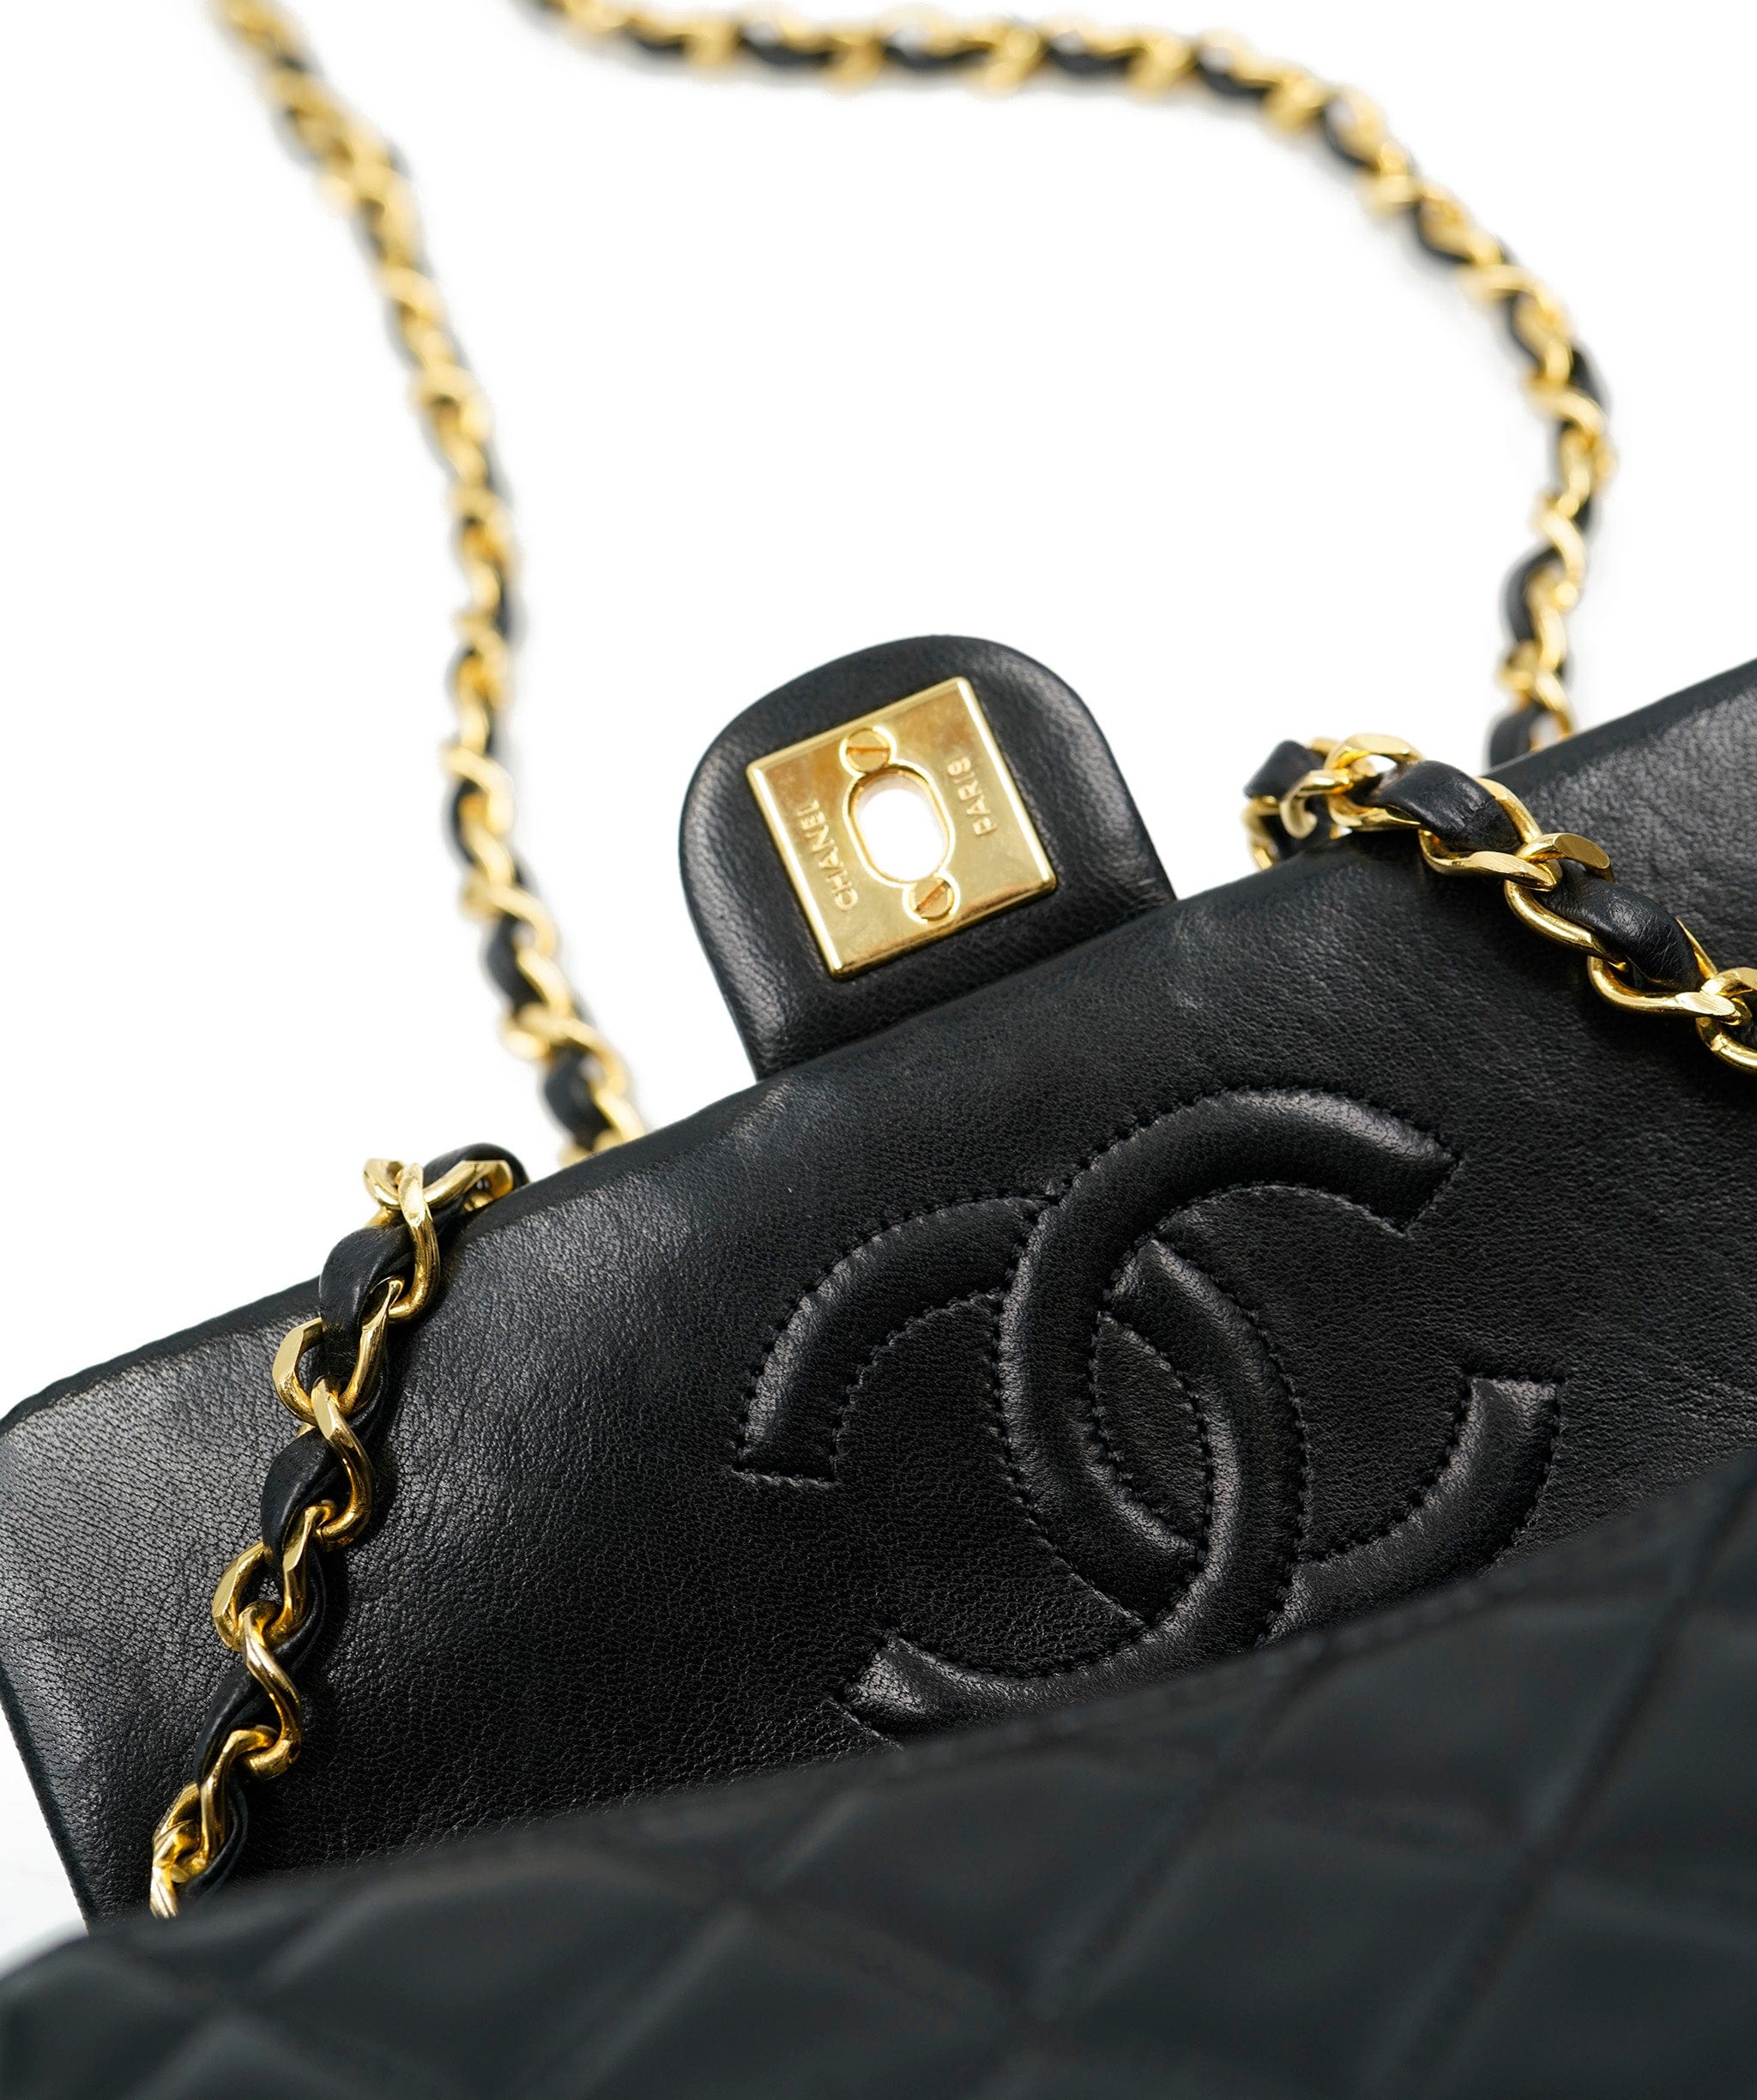 Chanel Chanel 8" Single Flap bag in Black Lambskin with GHW - AWL4074